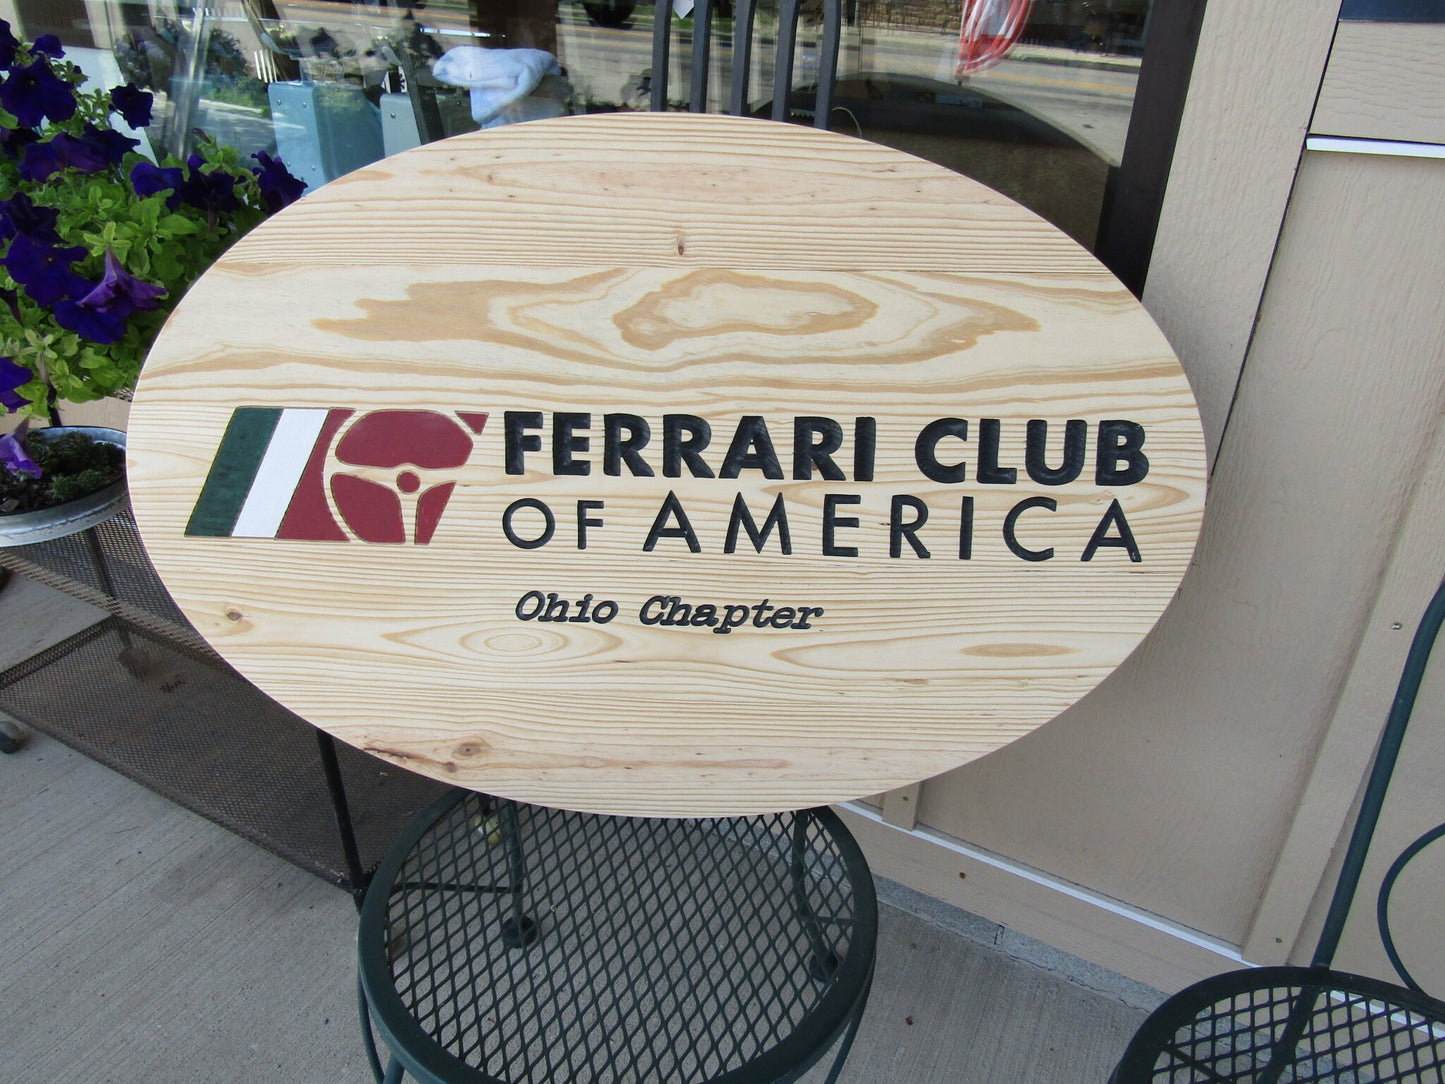 Automotive Car Club Vehicle Engraved Pine Color Filled Routed Sterring Wheel Logo Oval Large Handmade CNC Indoor Outdoor Commerical Signage